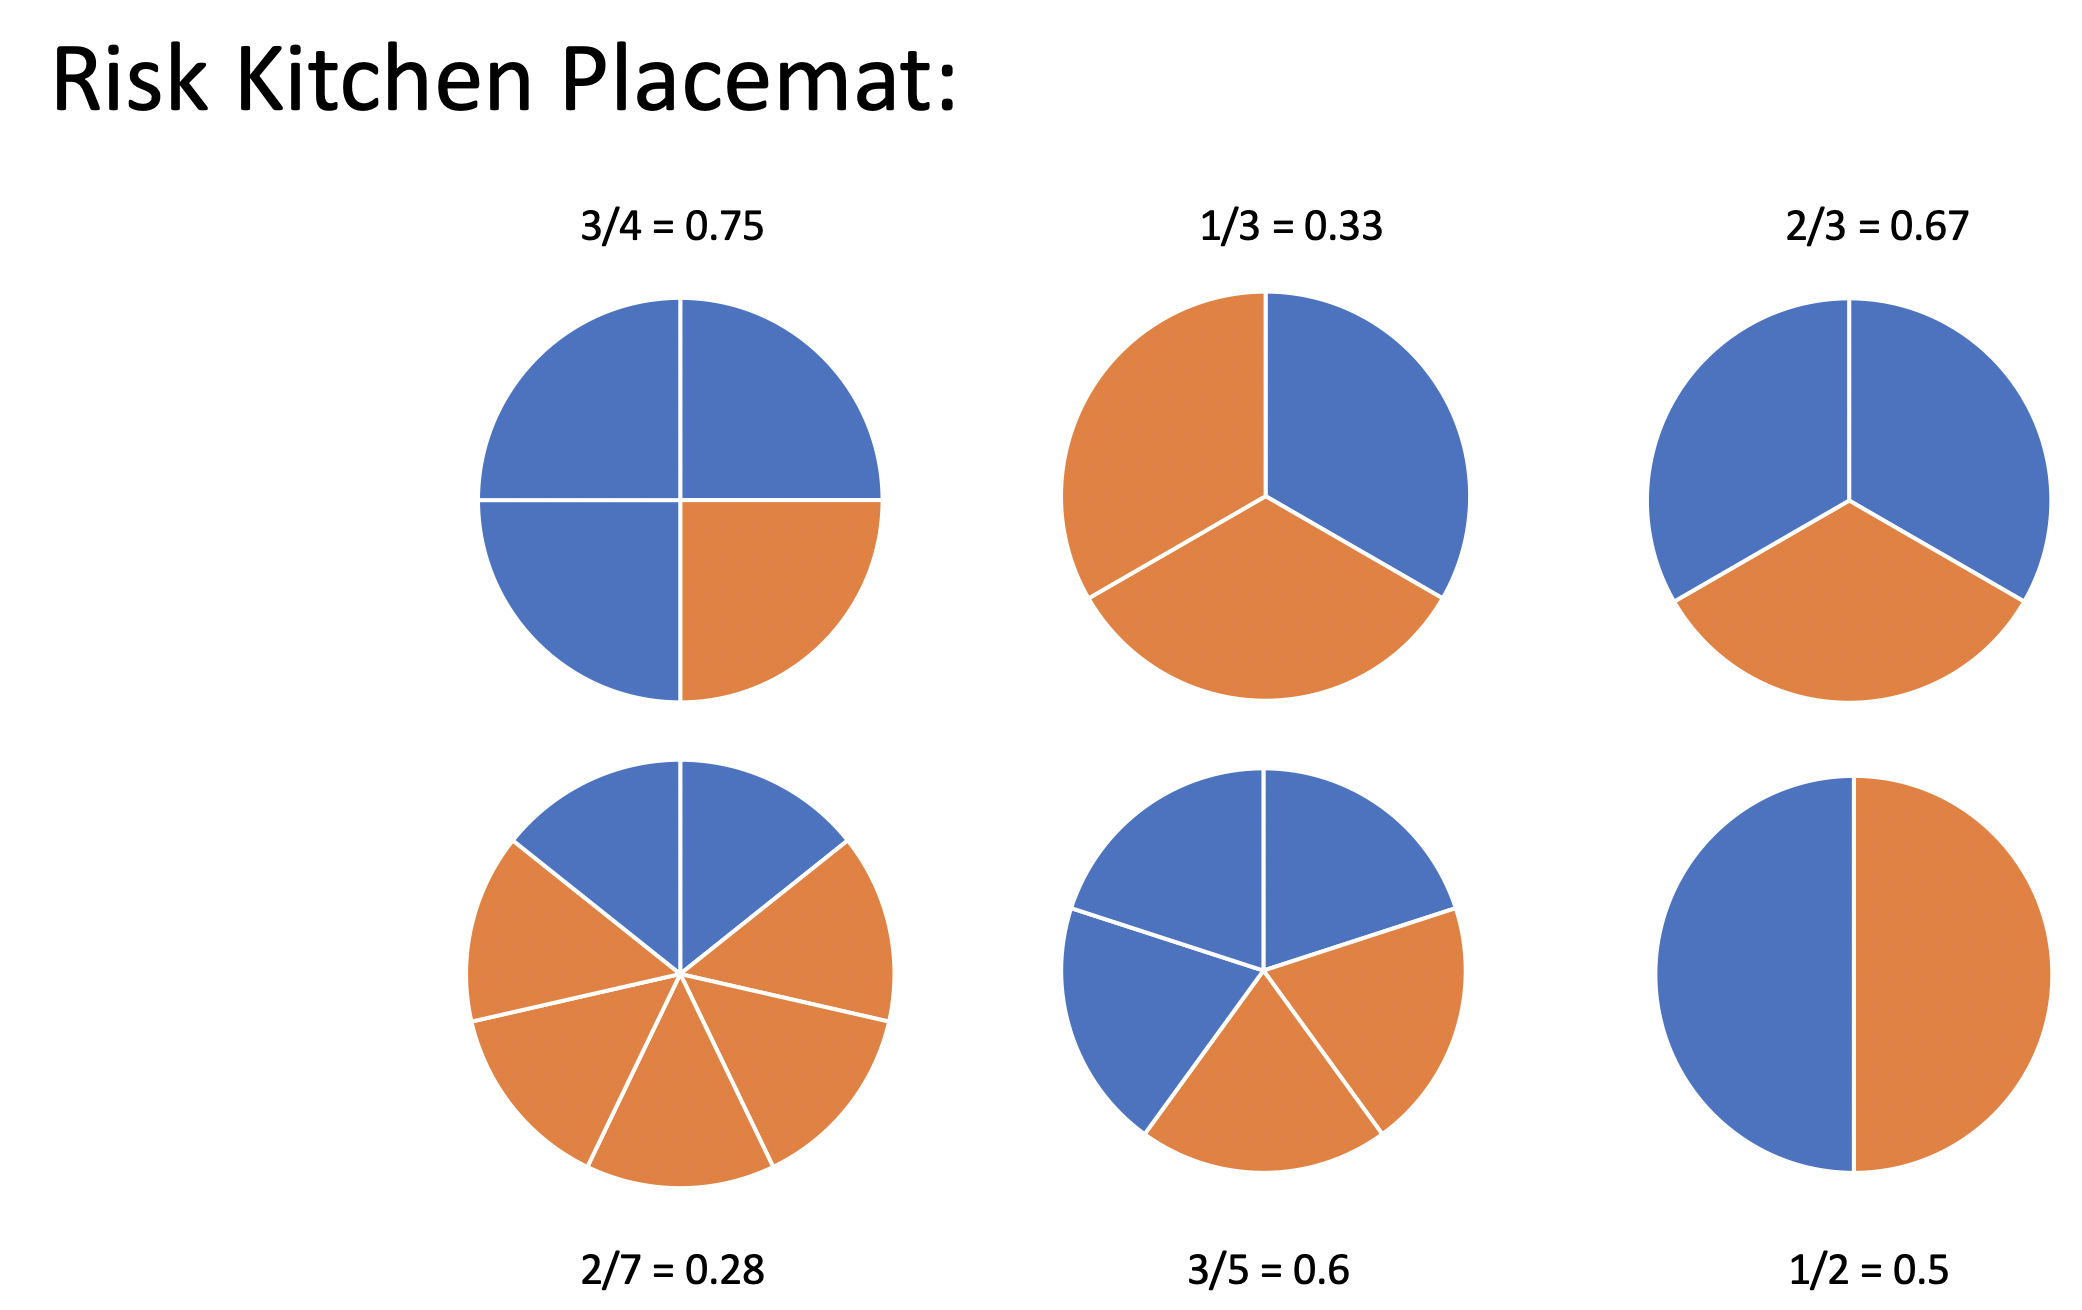 Six different pie charts are shown, each with a different number of equivalently sized pie pieces colored either blue or orange.  For example, one pie has three blue and two orange pieces.  Below that particular pie is written 3/5 = 0.6 which is the risk or the proportion of blue pie pieces.